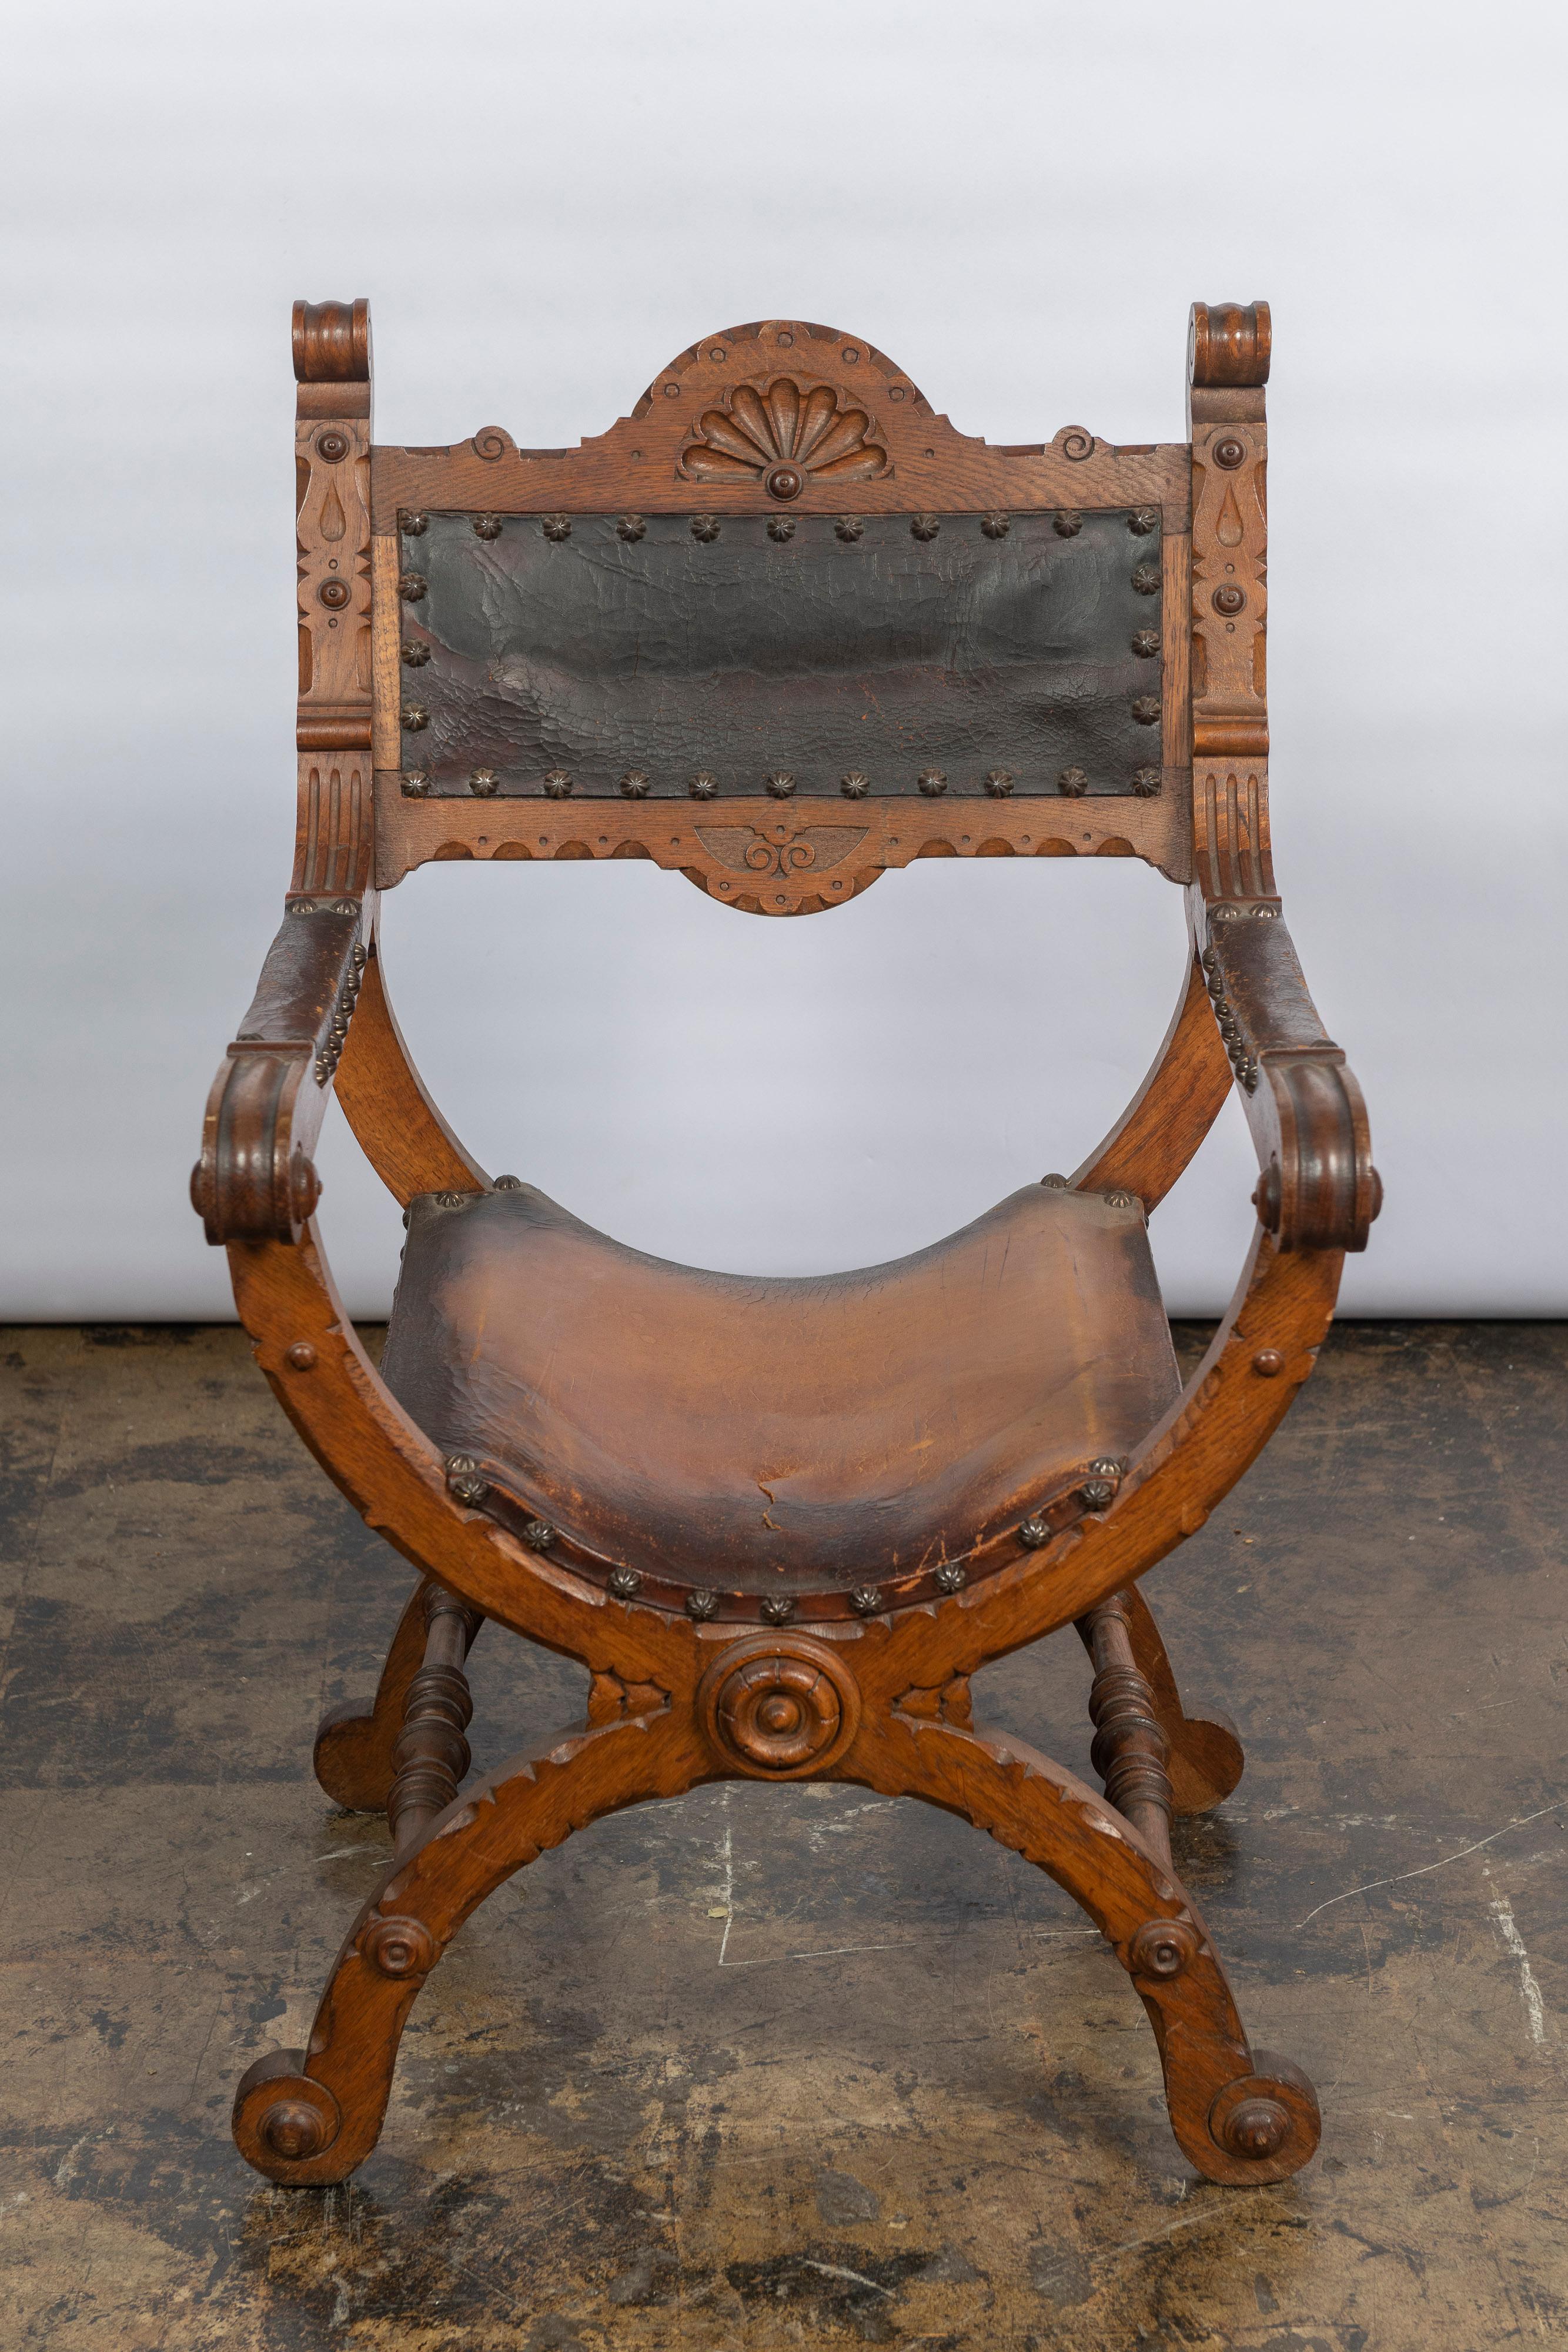 This style of chair is often referred to as a Dante or Savonarola chair, made of carved wood and heavy saddle leather. The frame is X- shaped and the chair is decorated with detailed carving across the rest arms, back and in the frontal center of